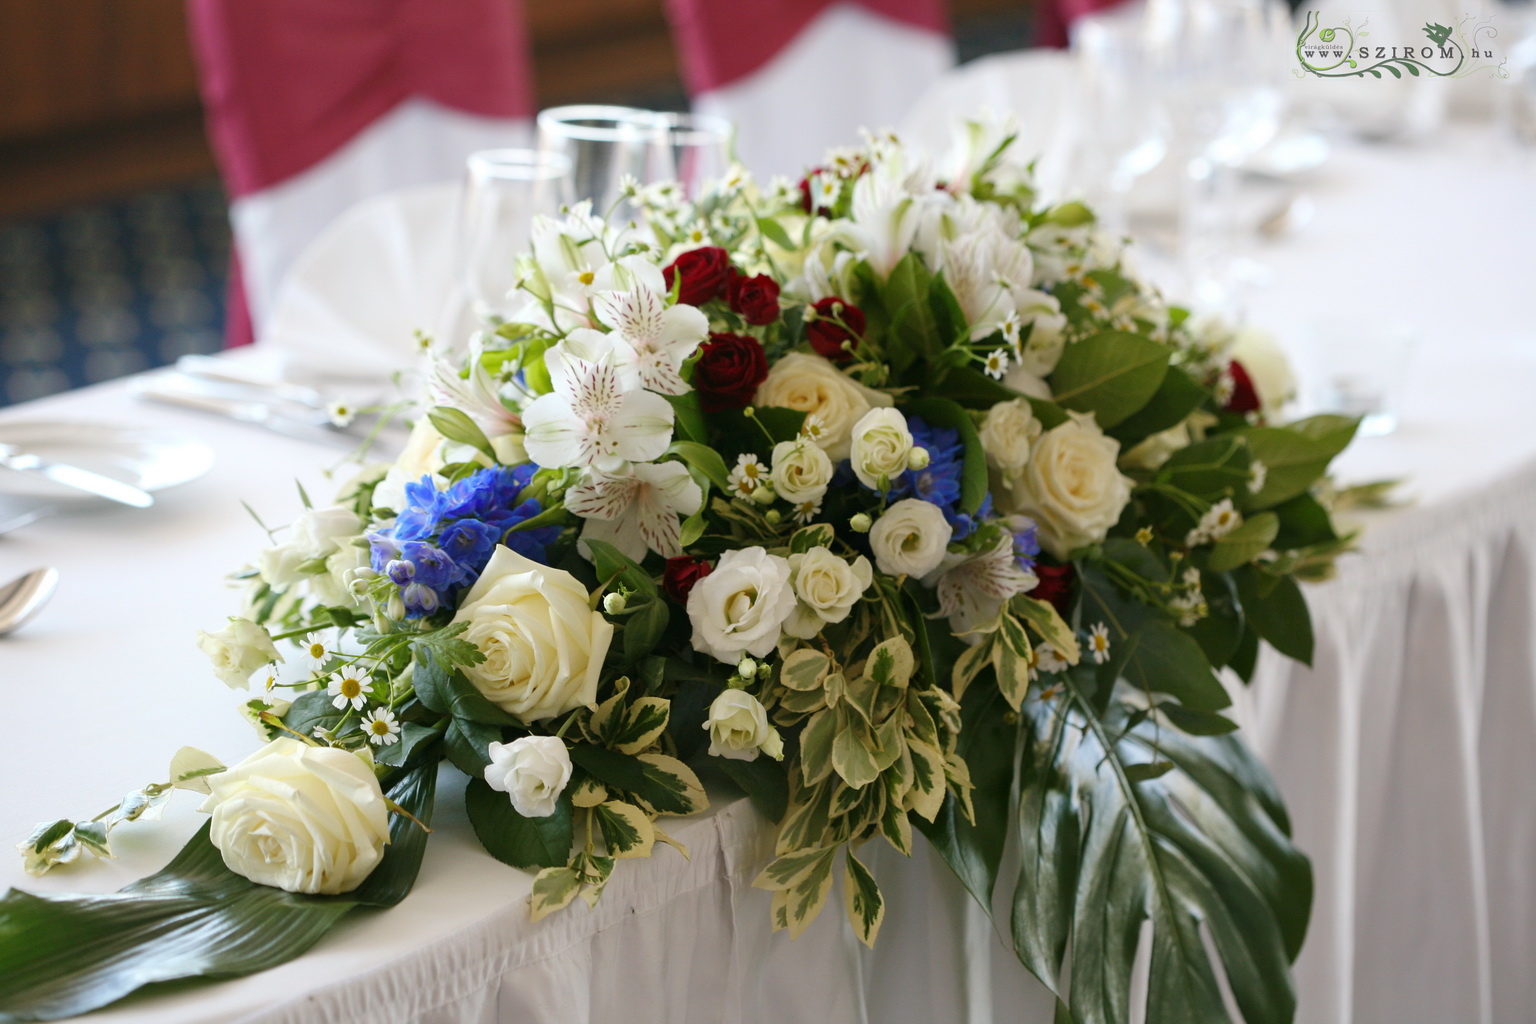 flower delivery Budapest - The main table decoration (rose, spray rose, delphinium, alstroemeria, white, blue, red) Marriott Hotel Buapest, wedding